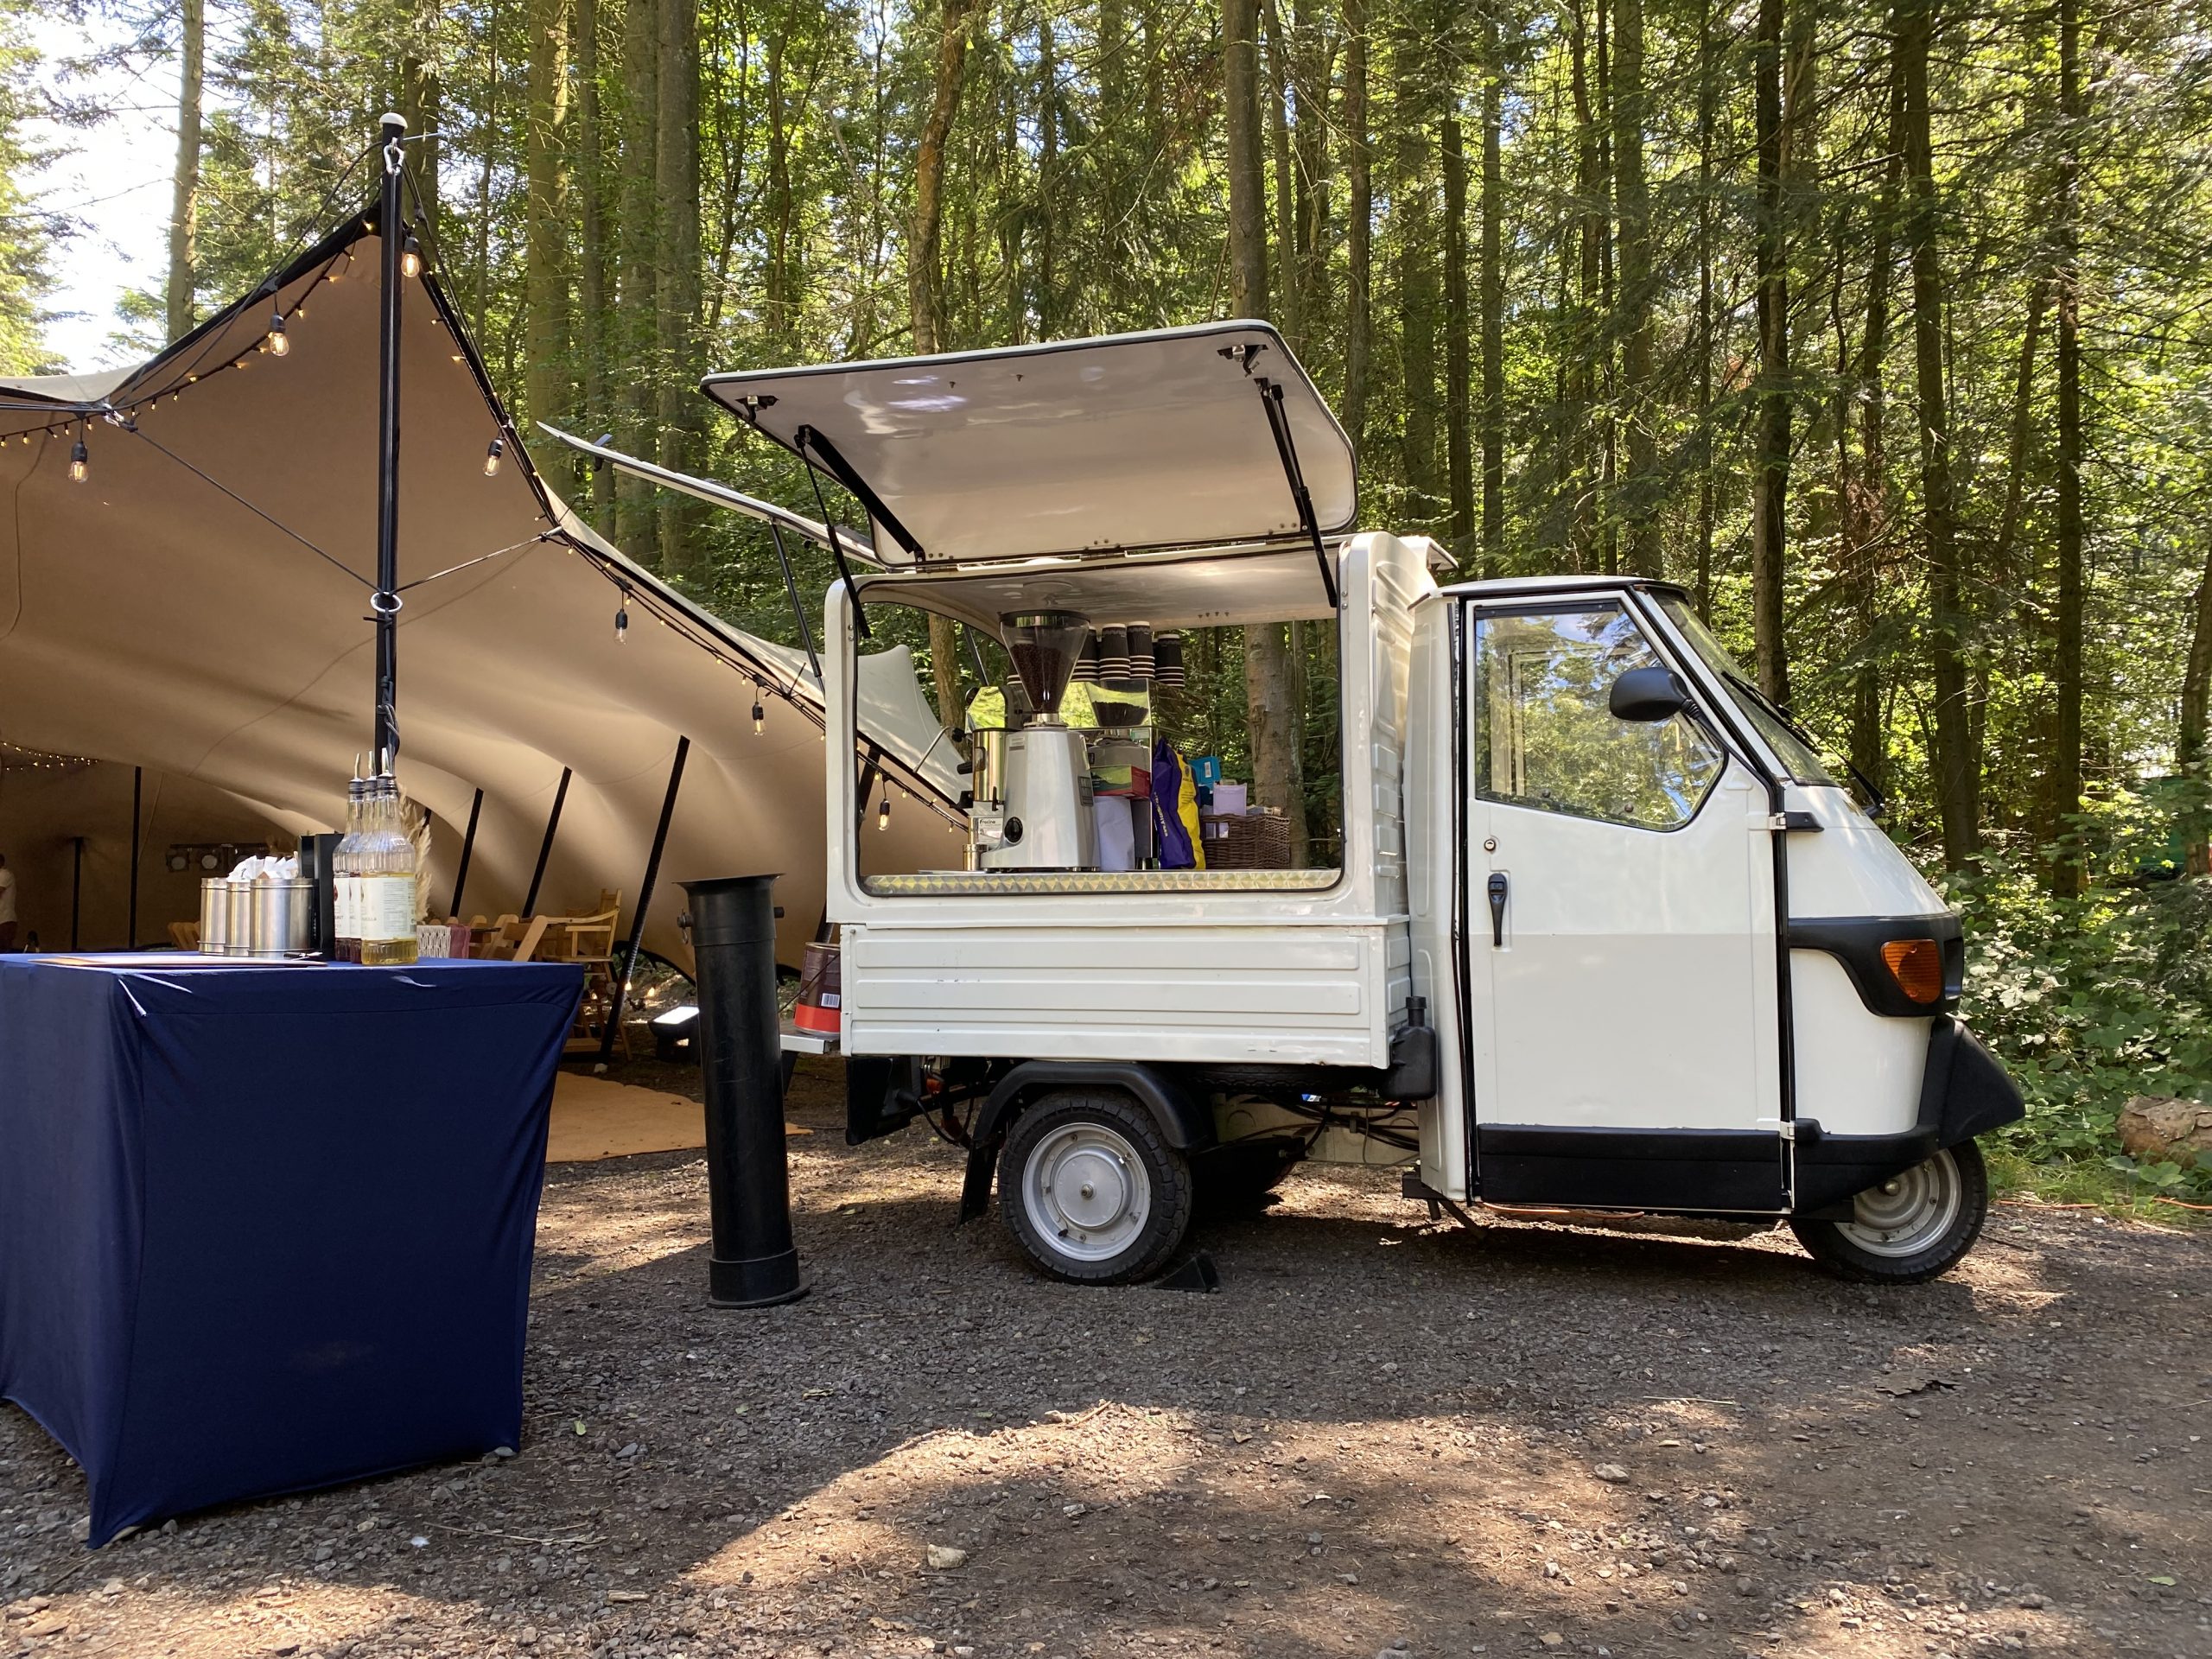 The Mobile Coffee Bean Piaggio Ape van at an outdoor event